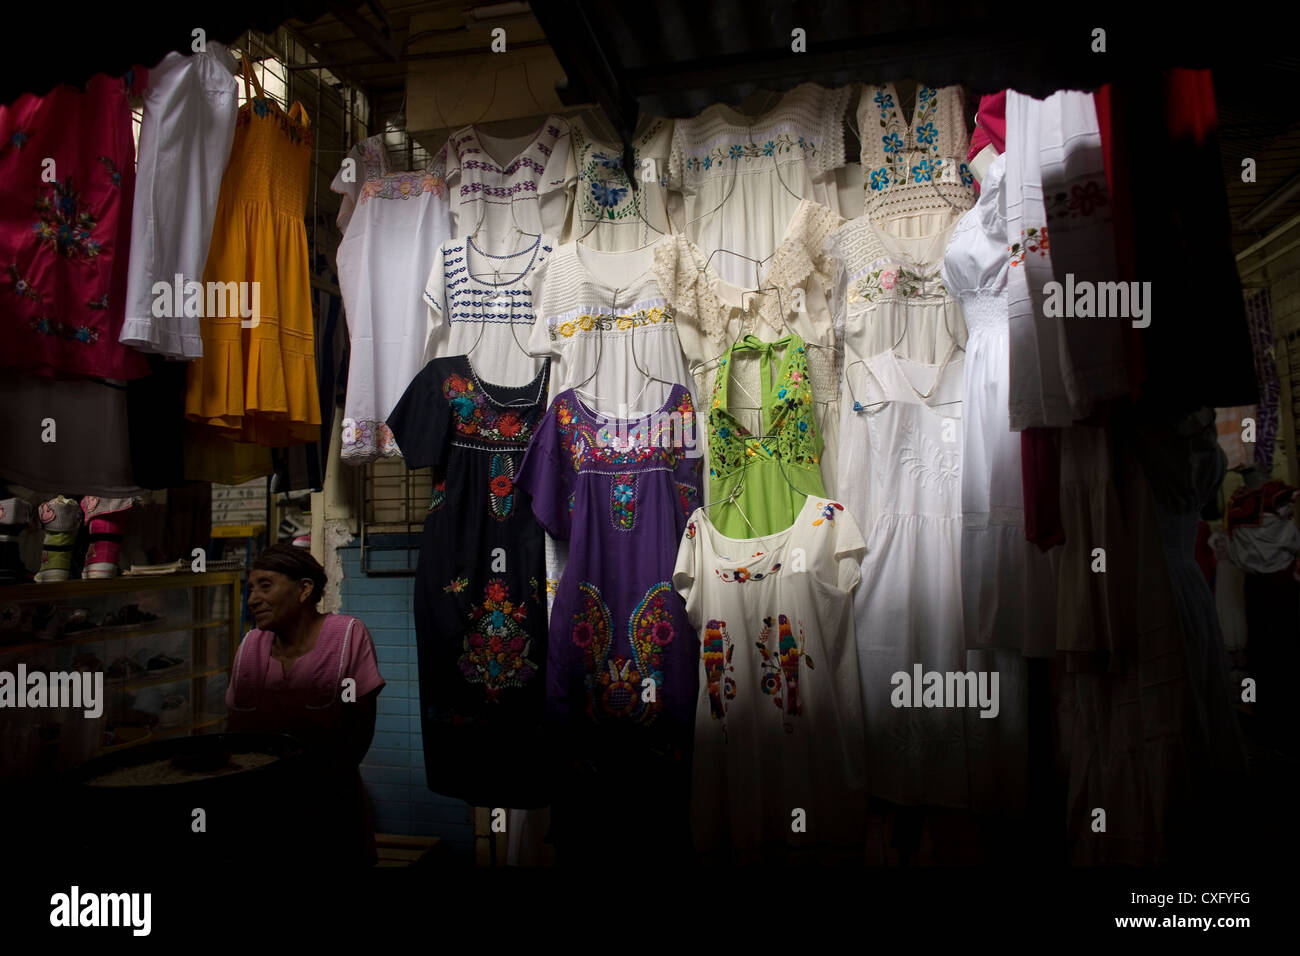 Clothes sit for sale in La Merced market in Oaxaca, Mexico, July 11, 2012. Stock Photo